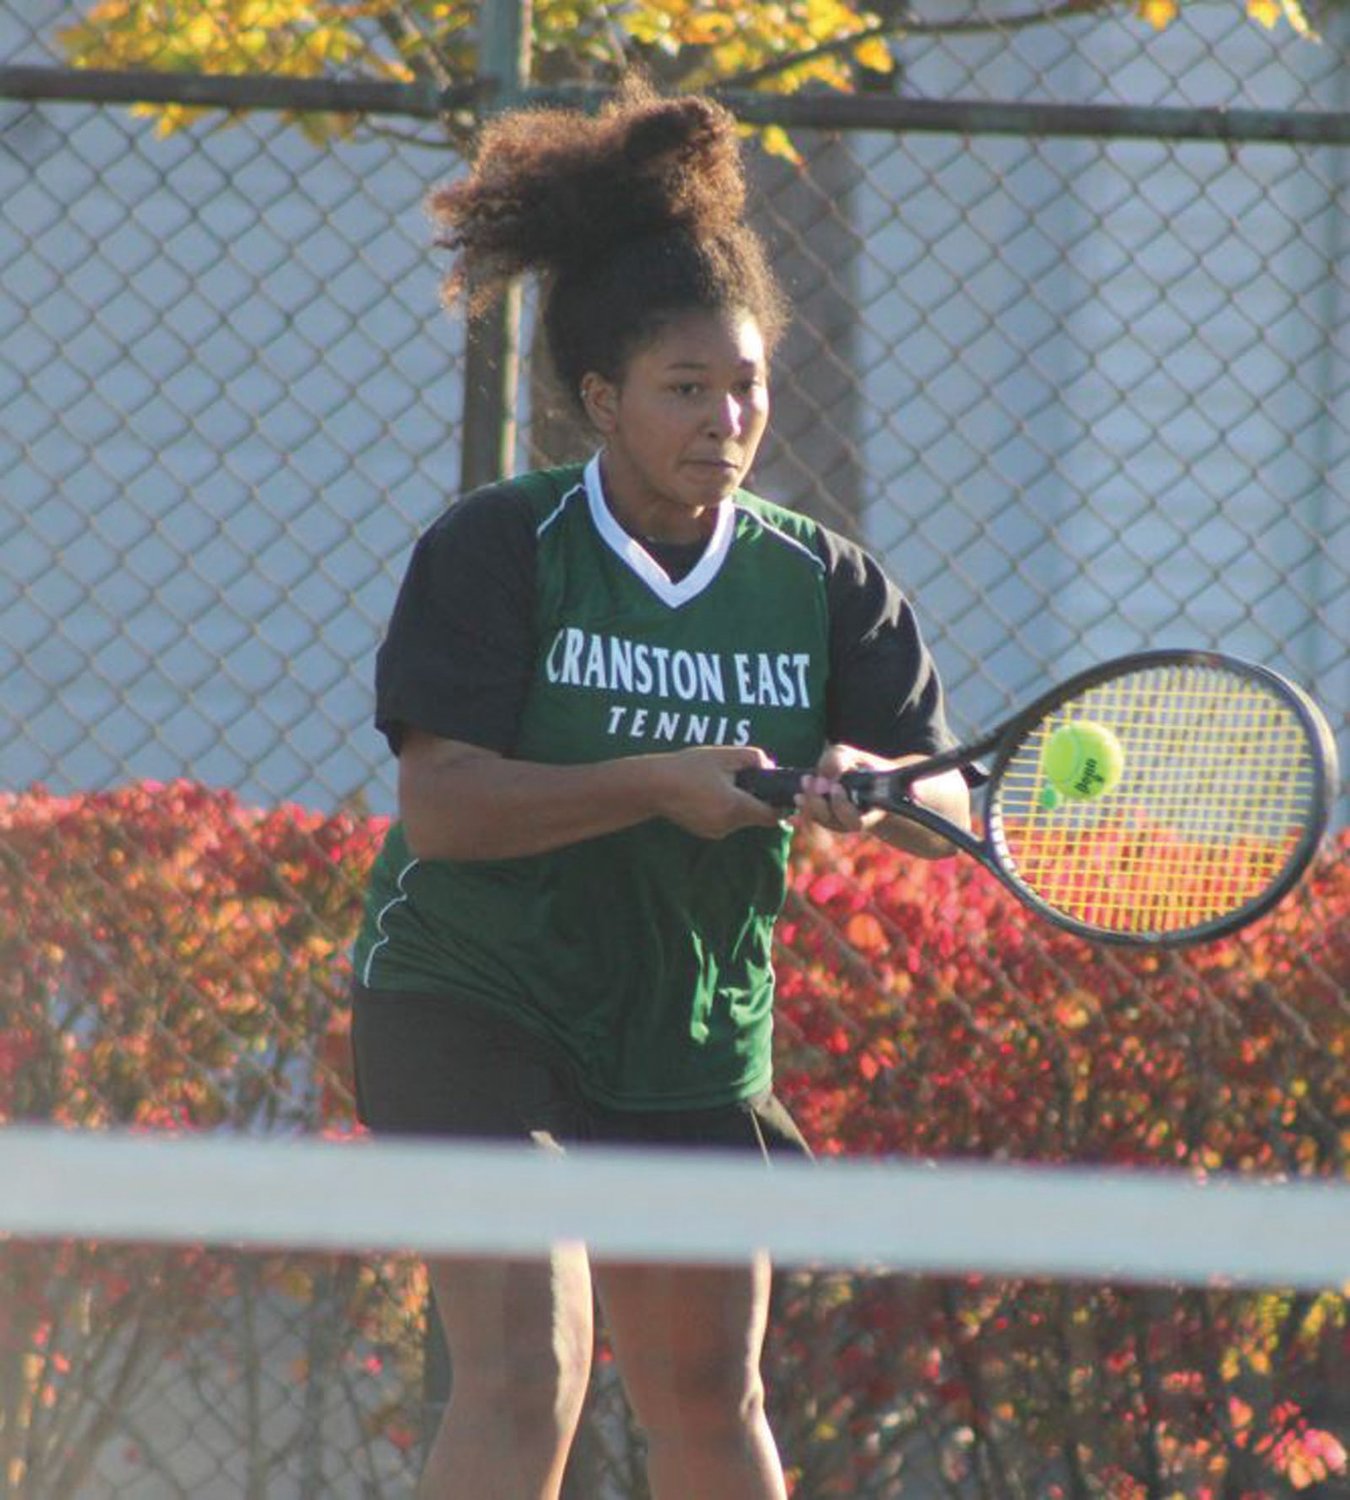 THAT’S A WRAP:
Cranston East’s Isabella
Ba returns a shot against
visiting Westerly last week
during the team’s regular
season finale at Park View
Middle School. The Lady
Bolts finished the season
with two wins and will now
set its sights on the 2022
fall.